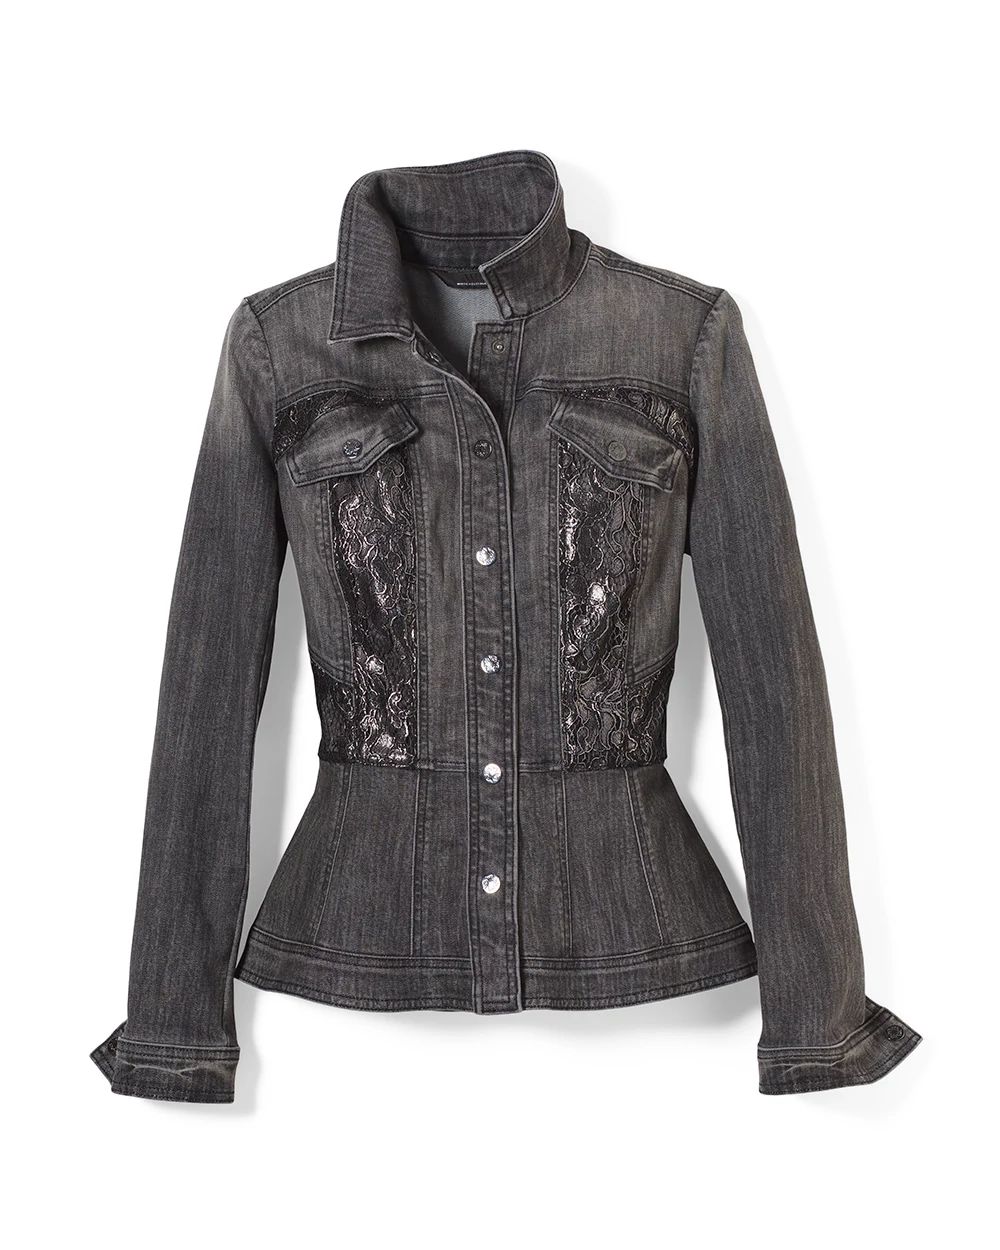 Lace Inset Denim Trucker Jacket click to view larger image.